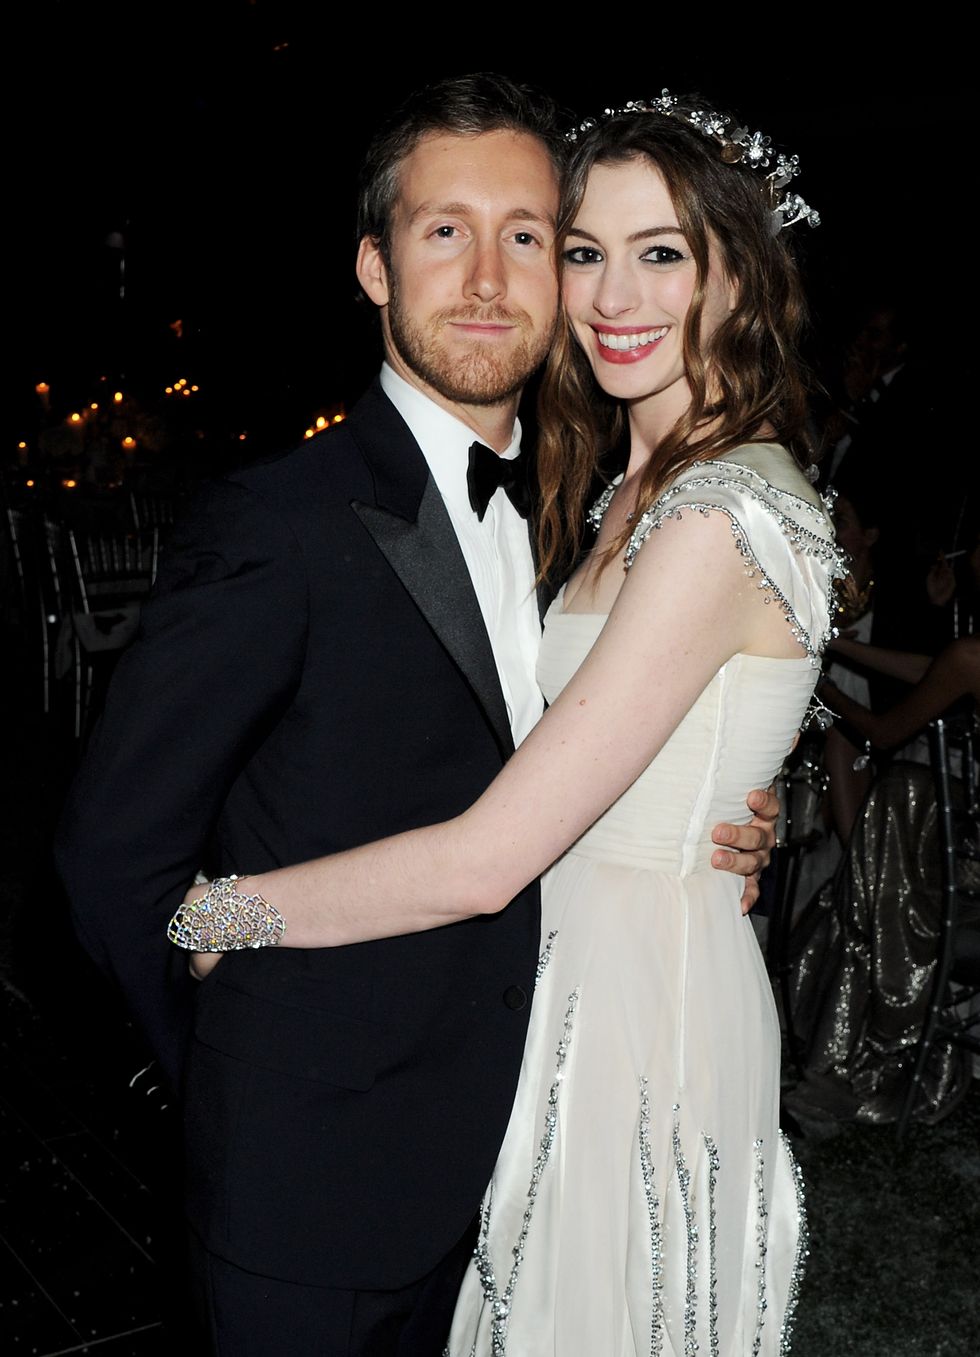 adam shulman and anne hathaway at the ﻿white fairy tale love ball﻿ in paris in 2011